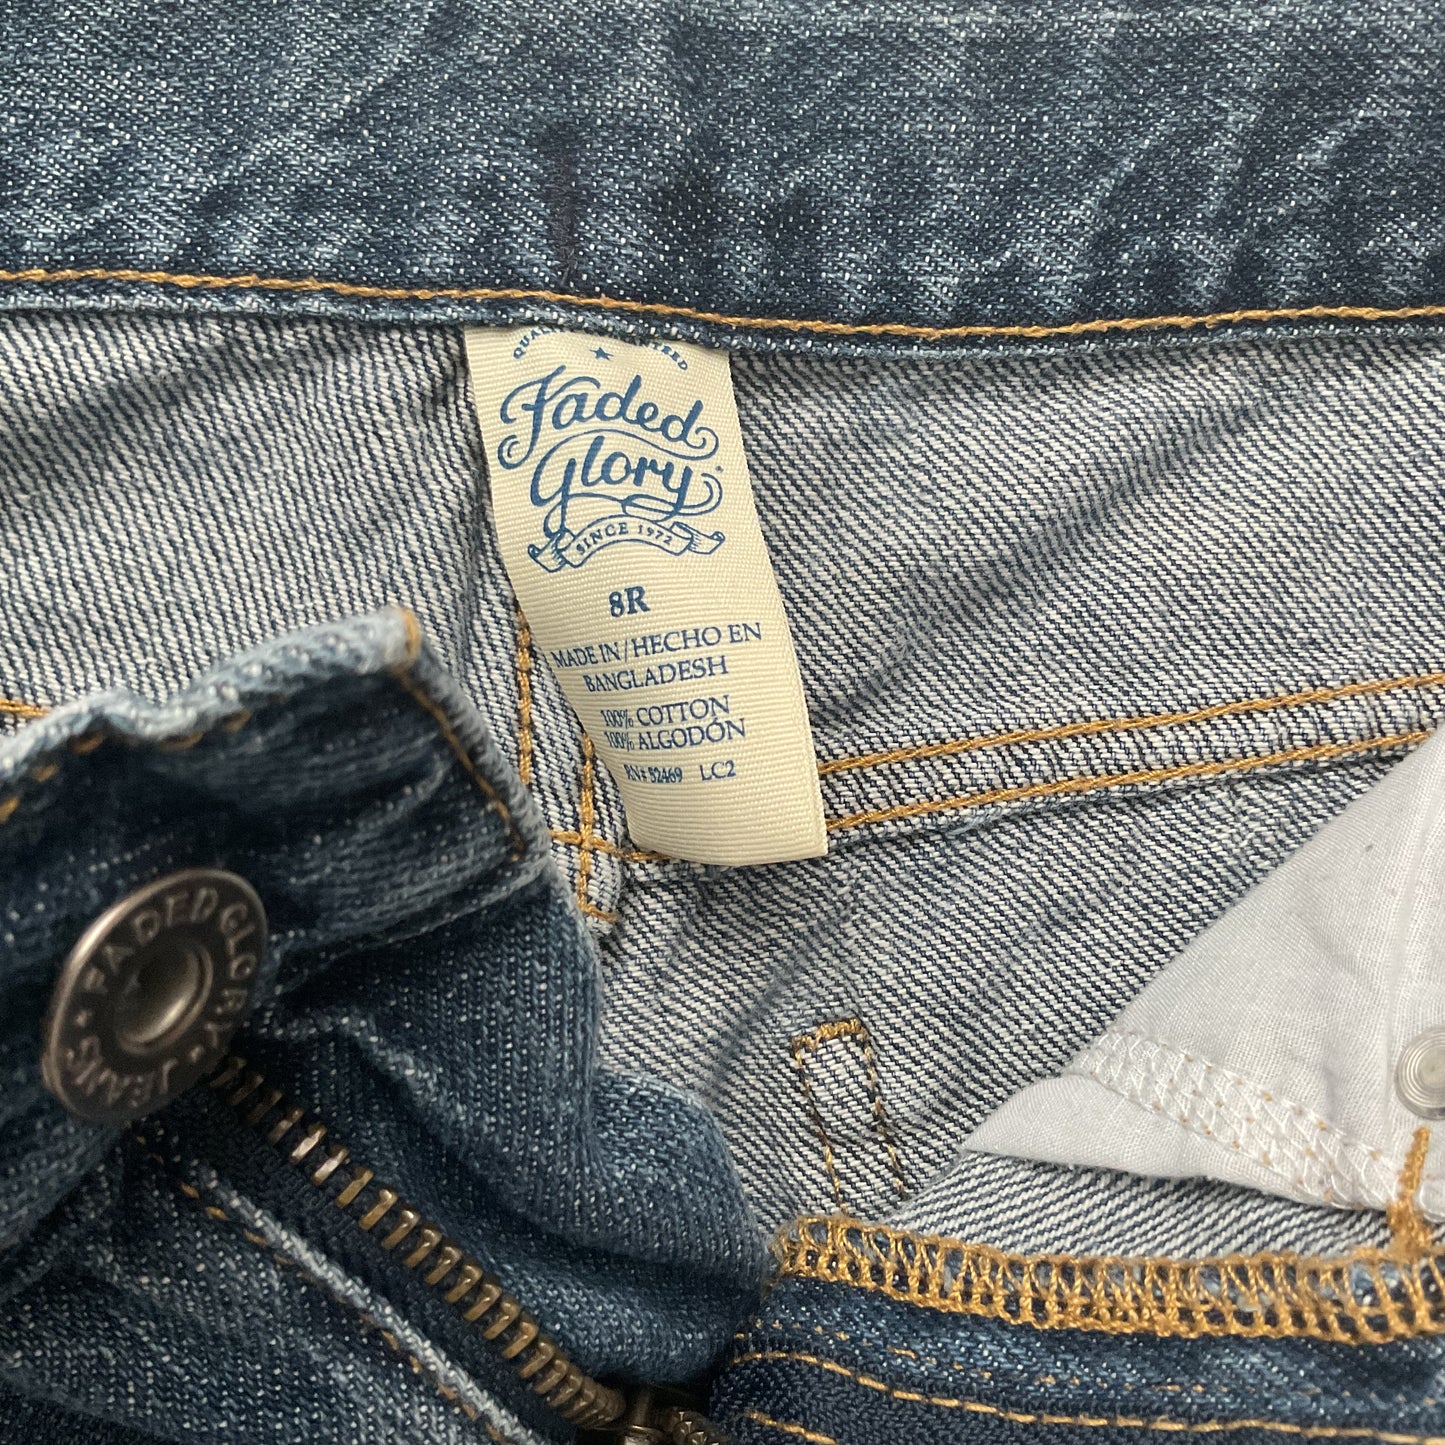 Faded Glory Boys Jeans Size 8R.